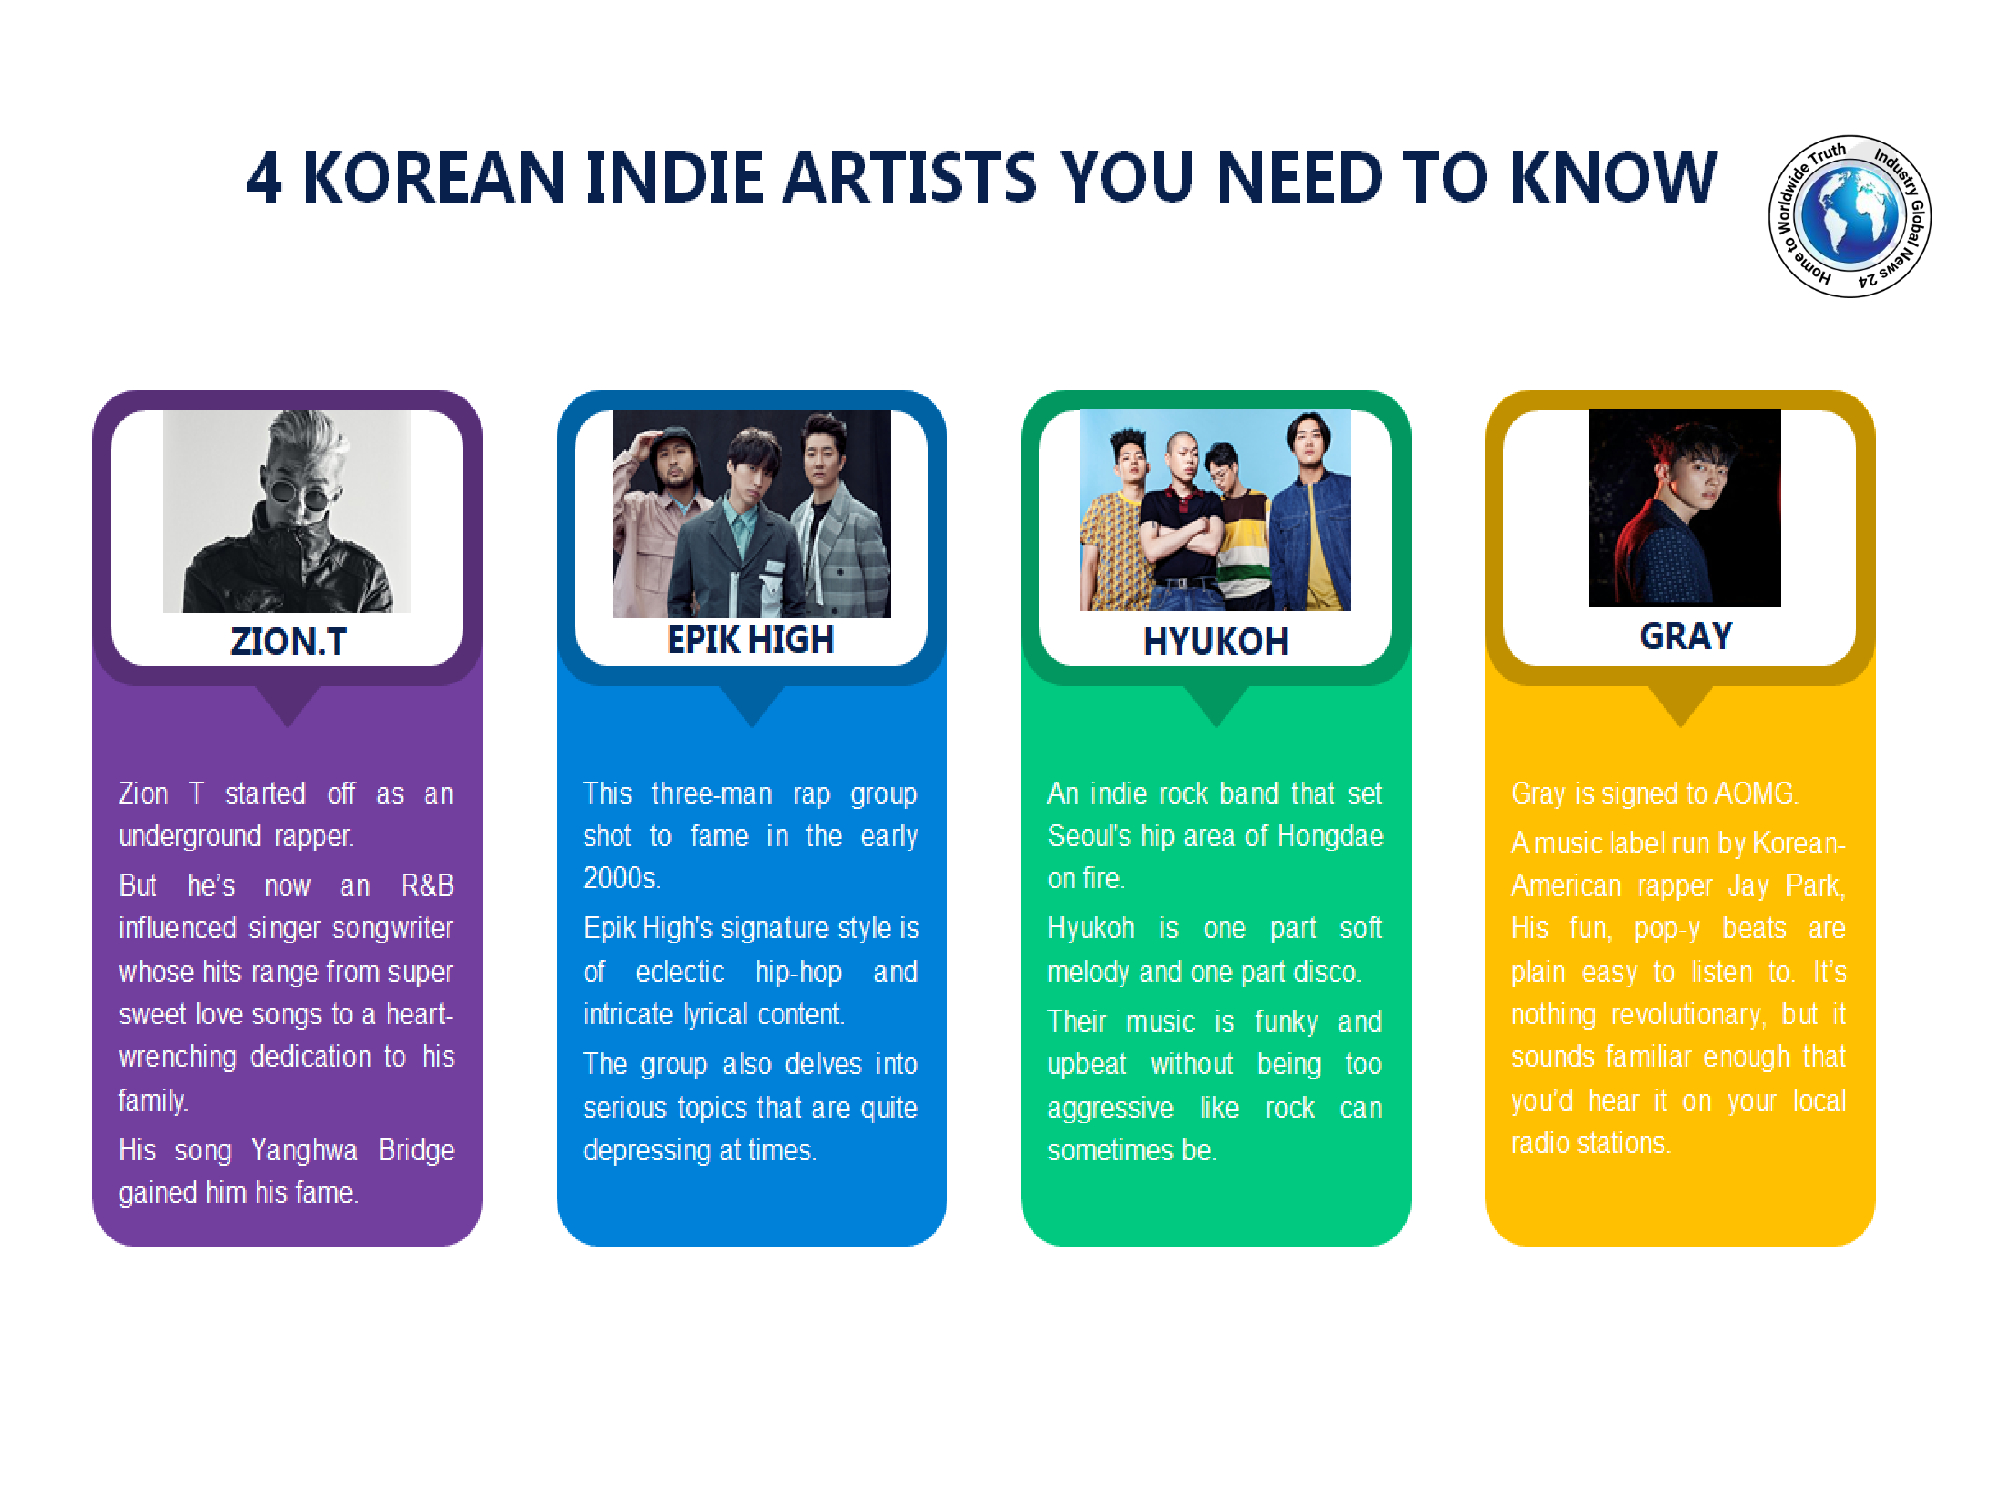 4-KOREAN-INDIE-ARTISTS-YOU-NEED-TO-KNOW